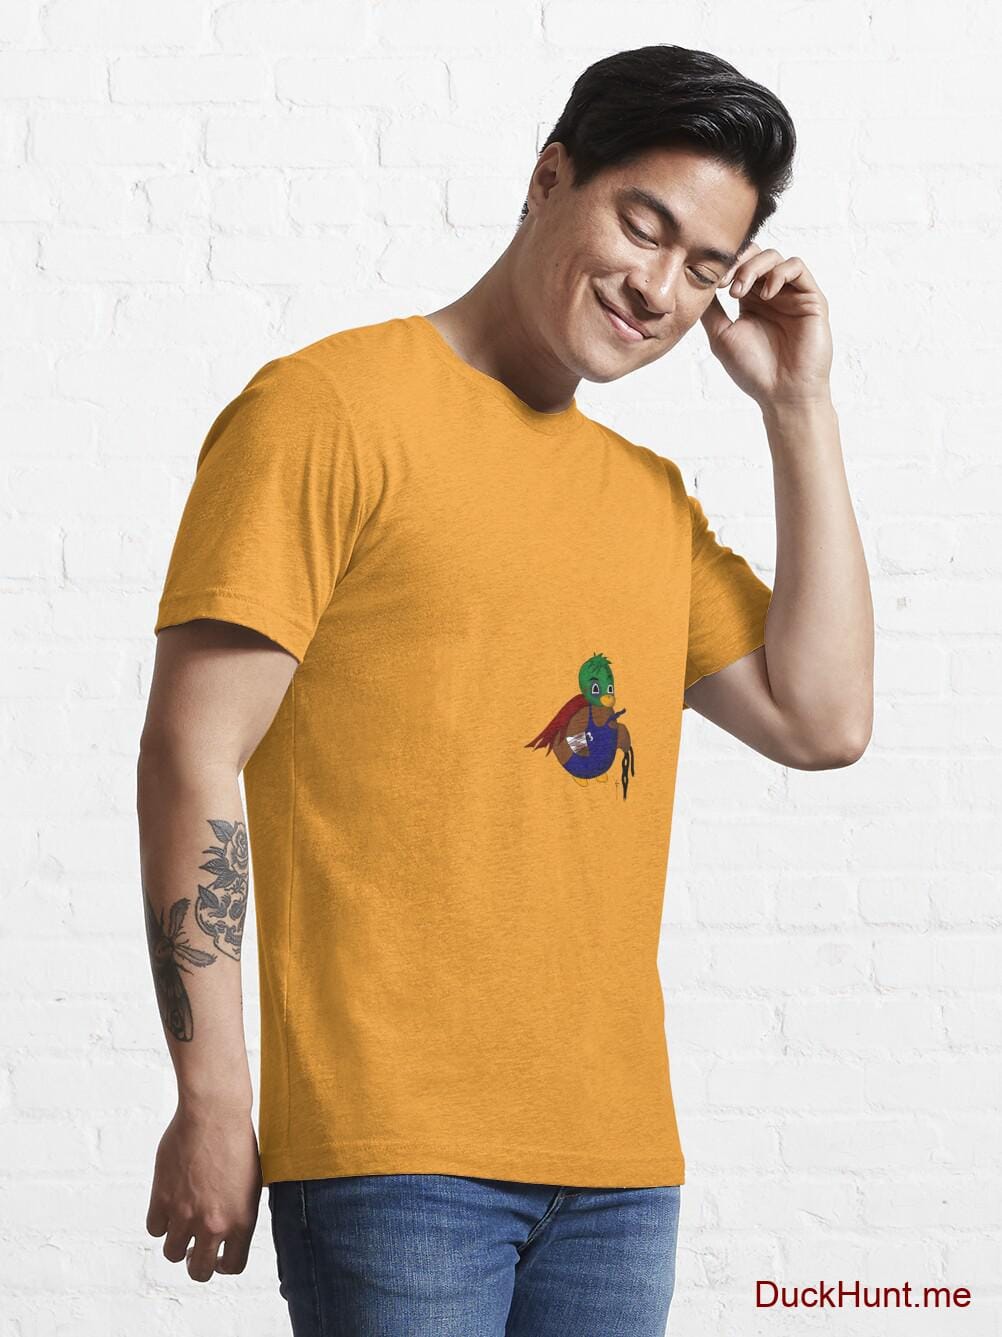 Dead DuckHunt Boss (smokeless) Gold Essential T-Shirt (Front printed) alternative image 6